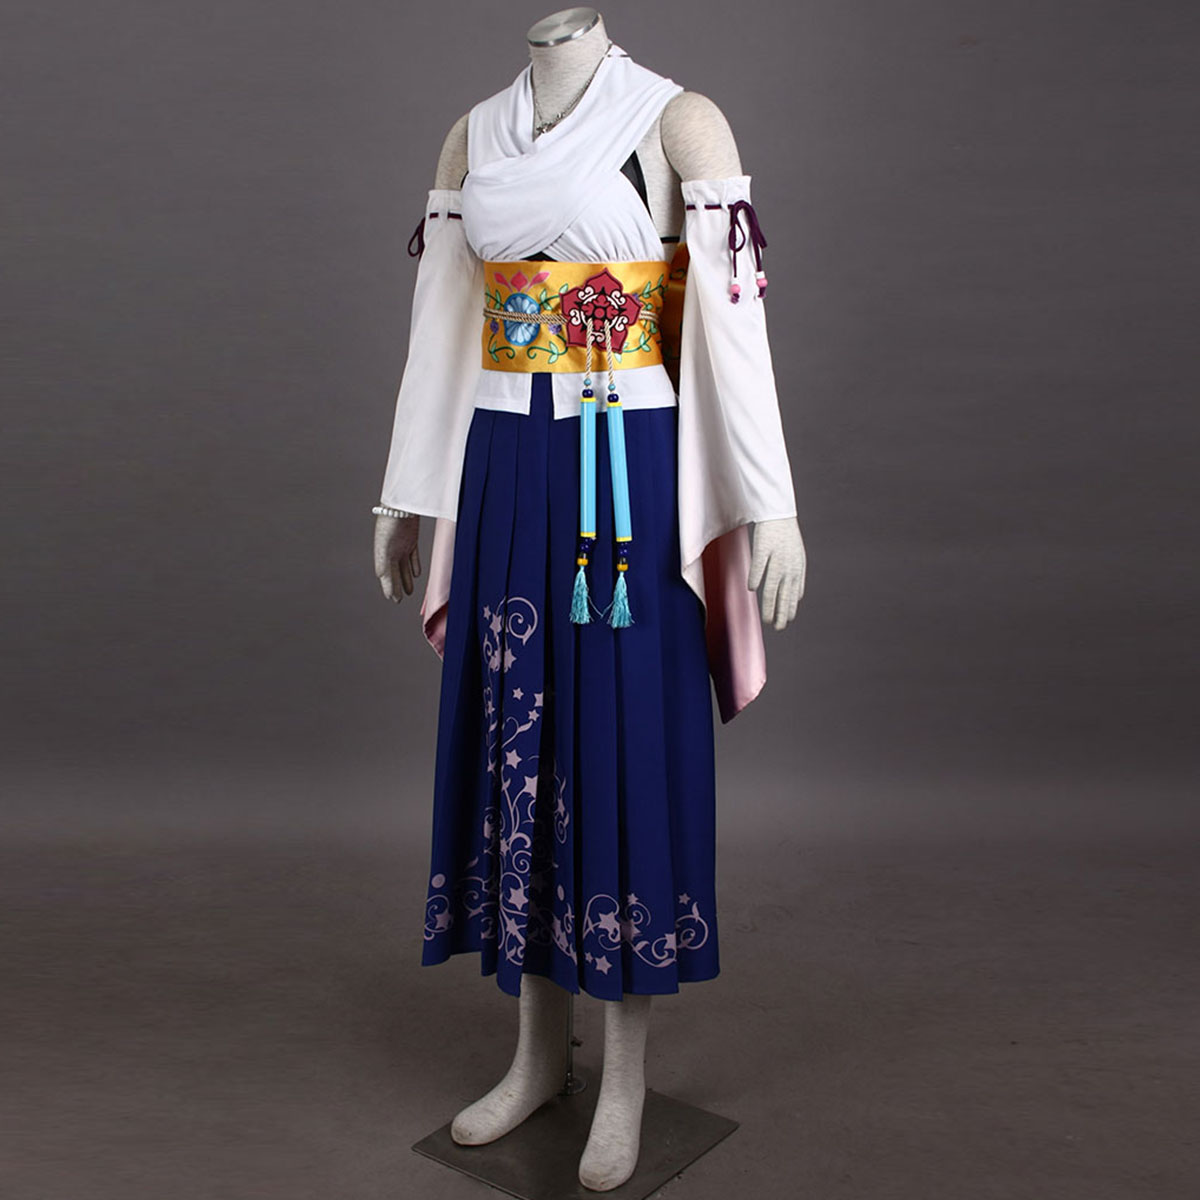 Final Fantasy X Yuna 1 Anime Cosplay Costumes Outfit